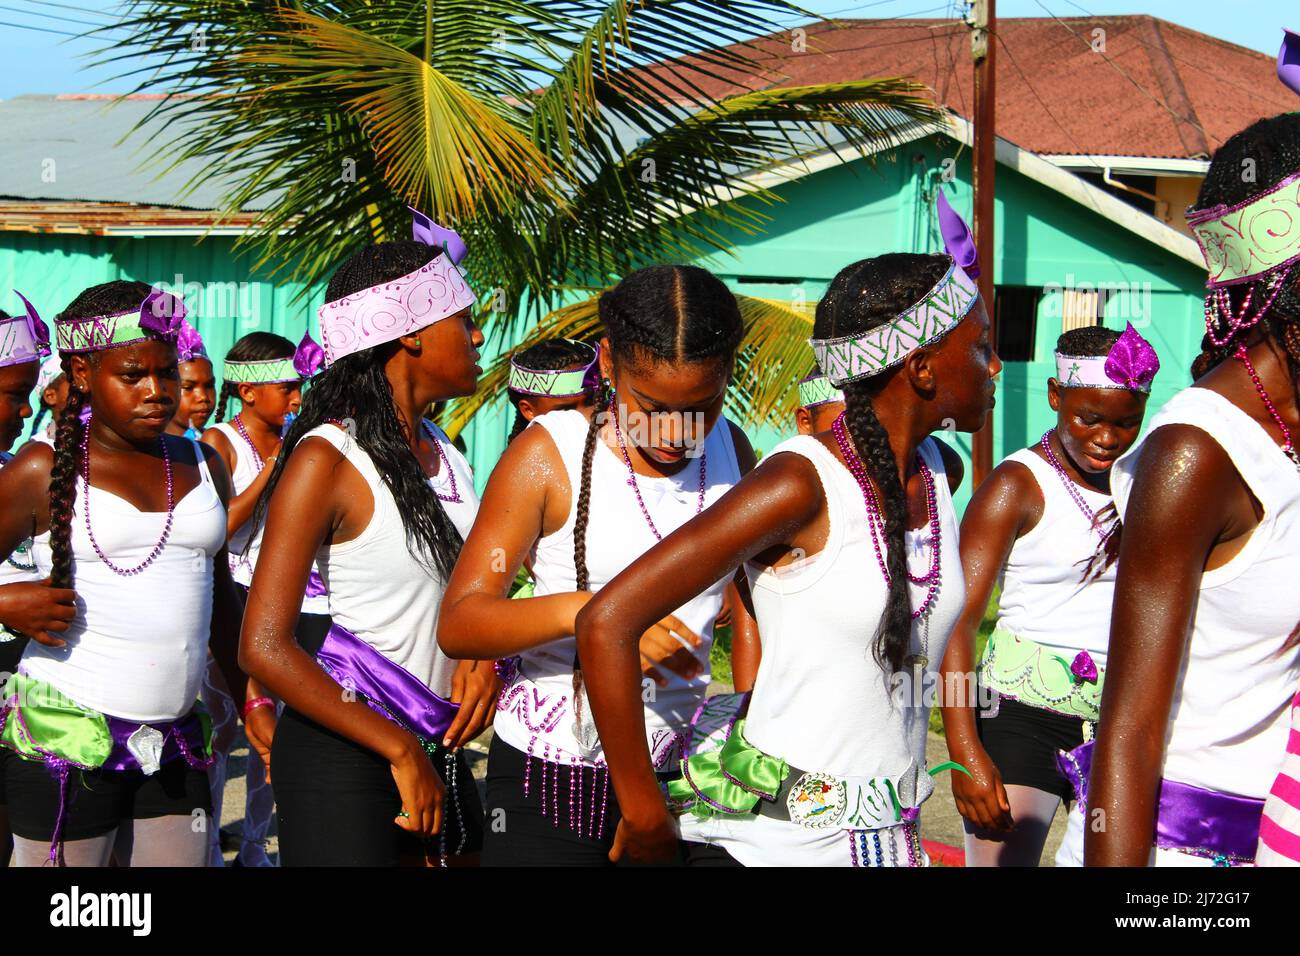 PUNTA GORDA, BELIZE - SEPTEMBER 10, 2015 St. George’s Caye Day celebrations and carnival with girls standing in black, white and purple with a green Stock Photo